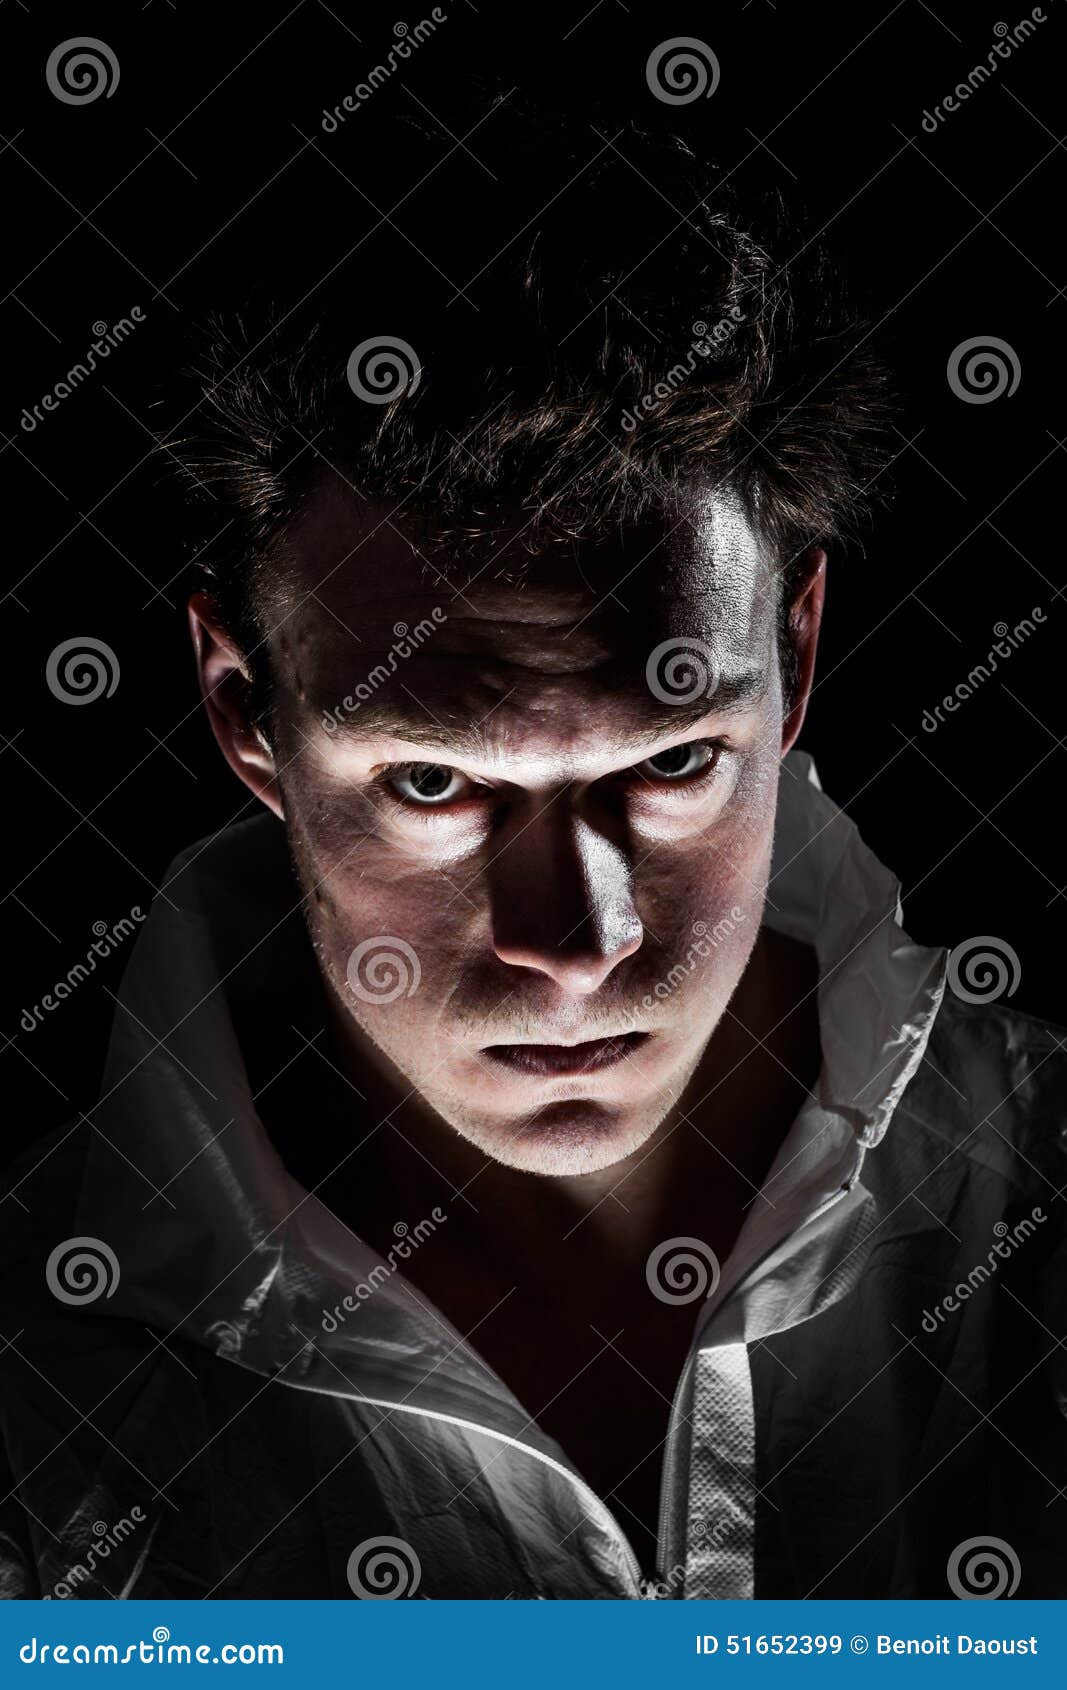 Obscure Freaky Psycho Man stock image. Image of bizarre - 51652399